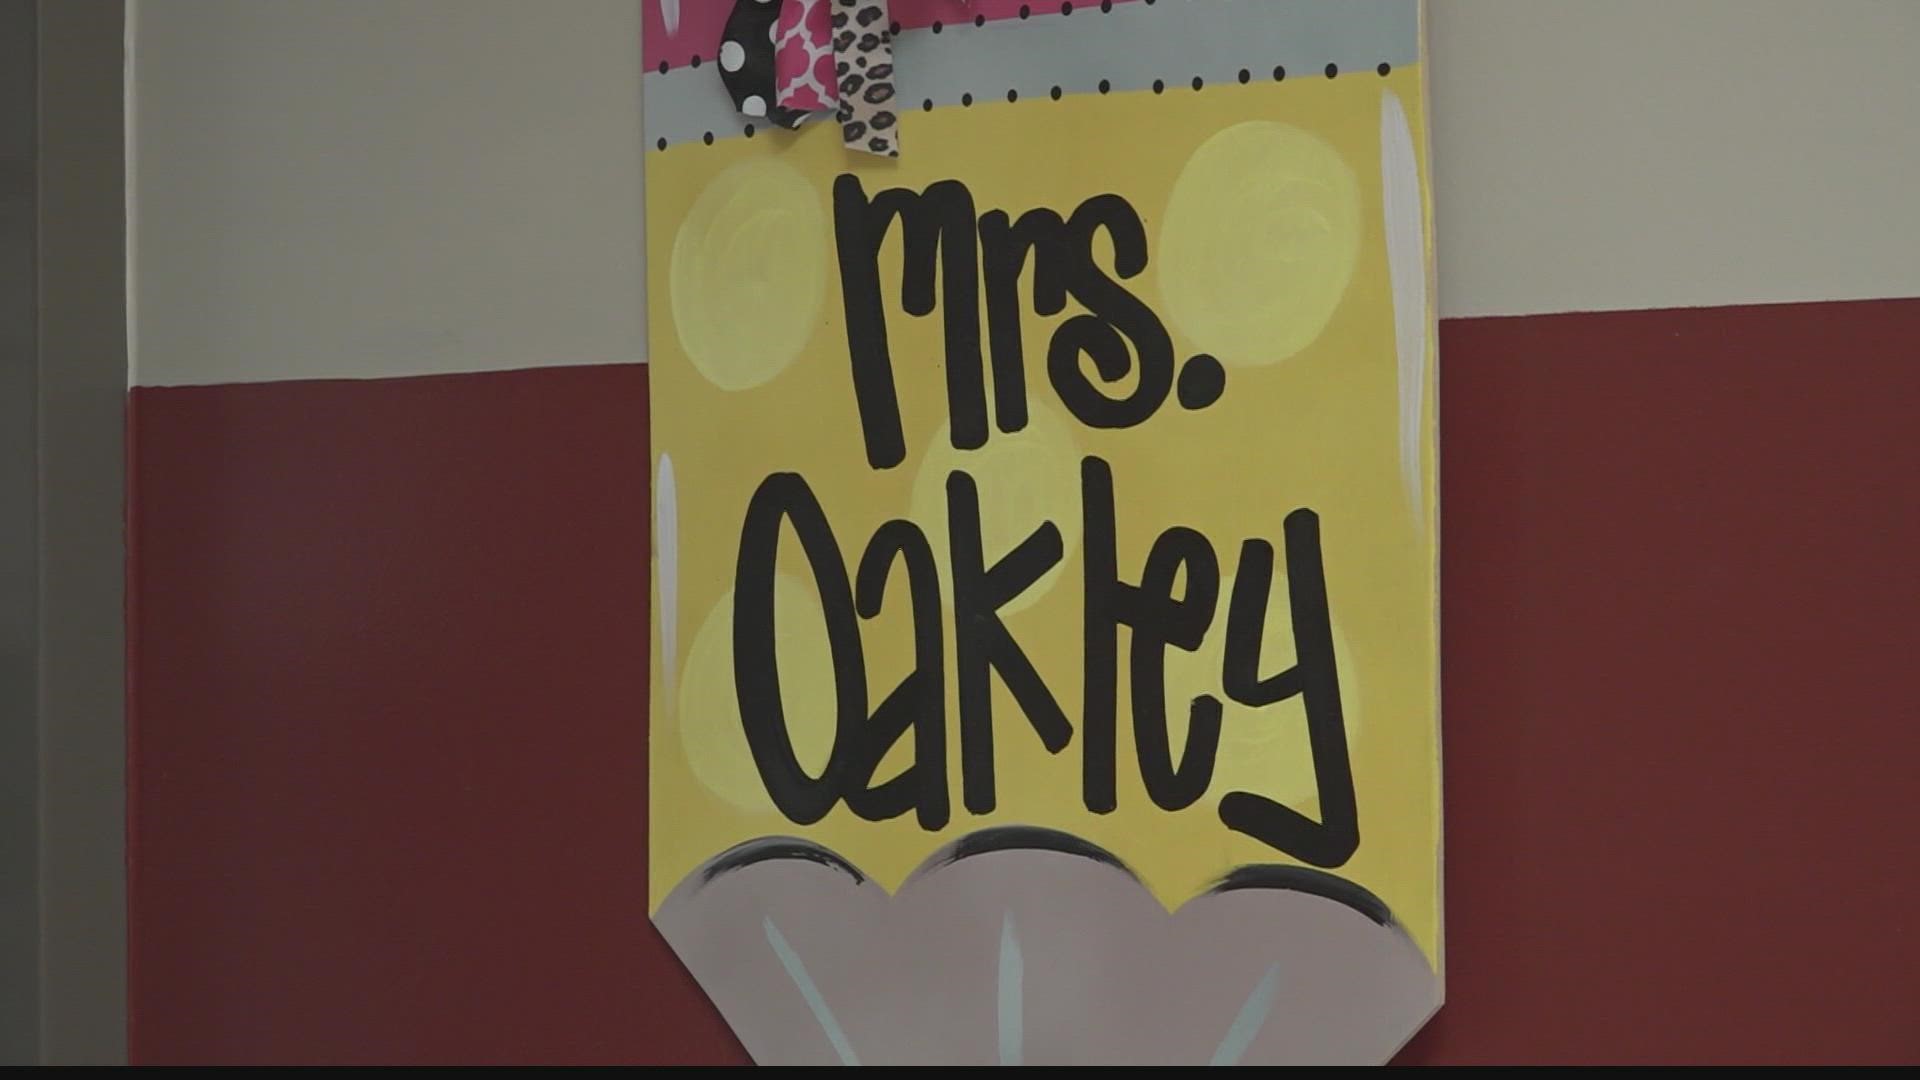 We're honoring Ms.Oakley, a collaborative special education teacher at Mountain Gap Elementary school in Huntsville.